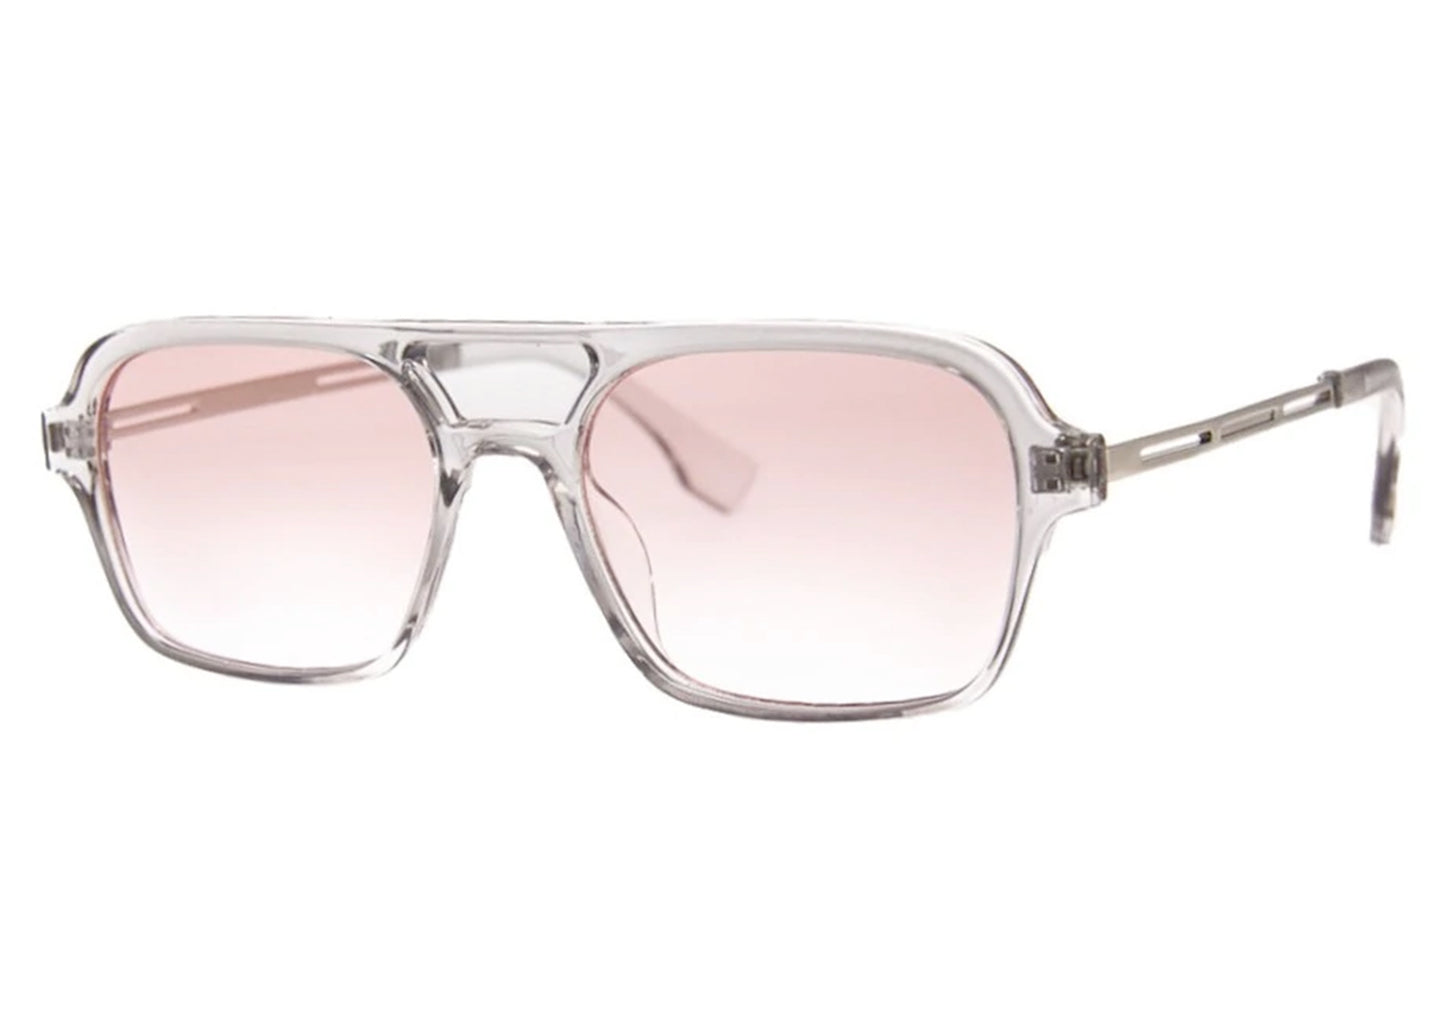 Overland Sunglasses in Grey/Pink